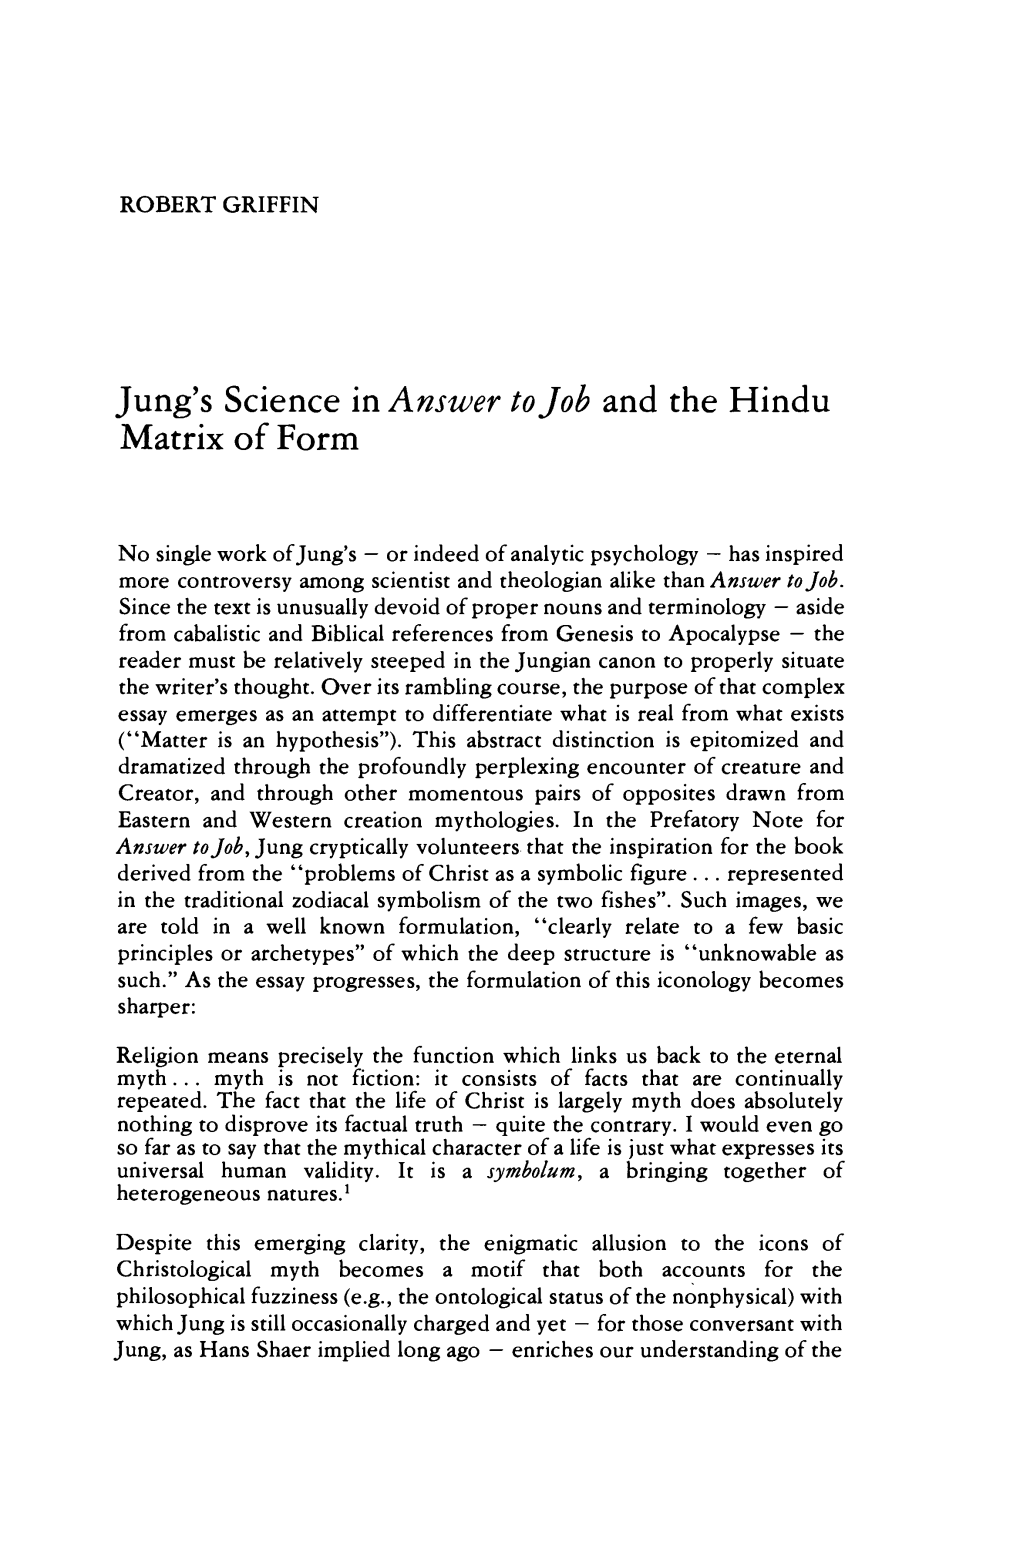 Jung's Science in Answer Tojob and the Hindu Matrix of Form